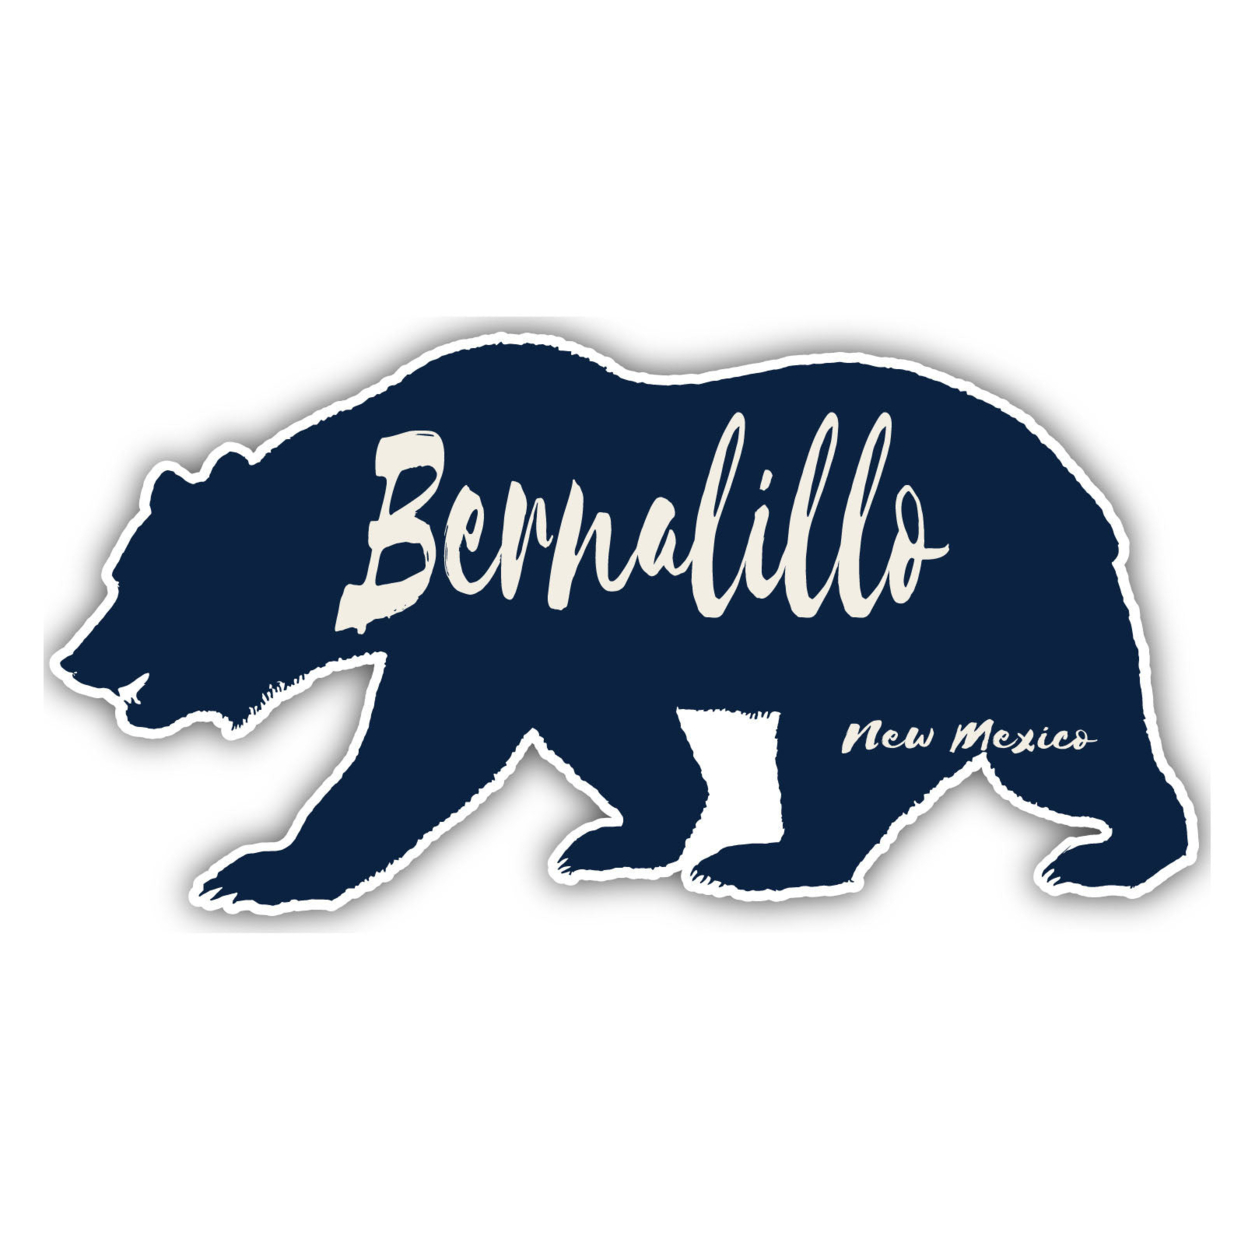 Bernalillo New Mexico Souvenir Decorative Stickers (Choose Theme And Size) - 4-Pack, 10-Inch, Camp Life